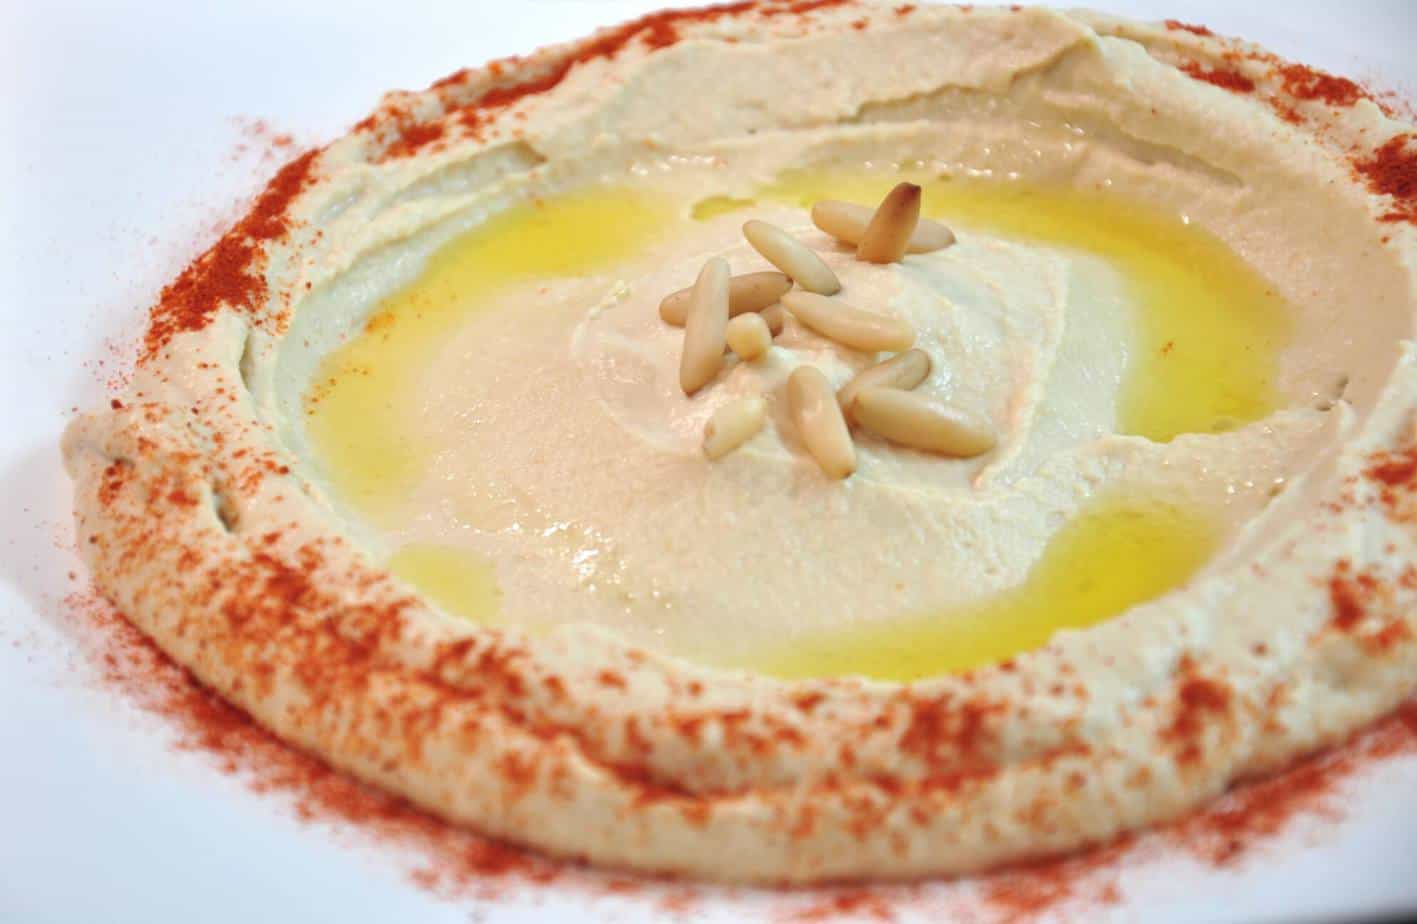 homemade hummus from scratch with olive oil